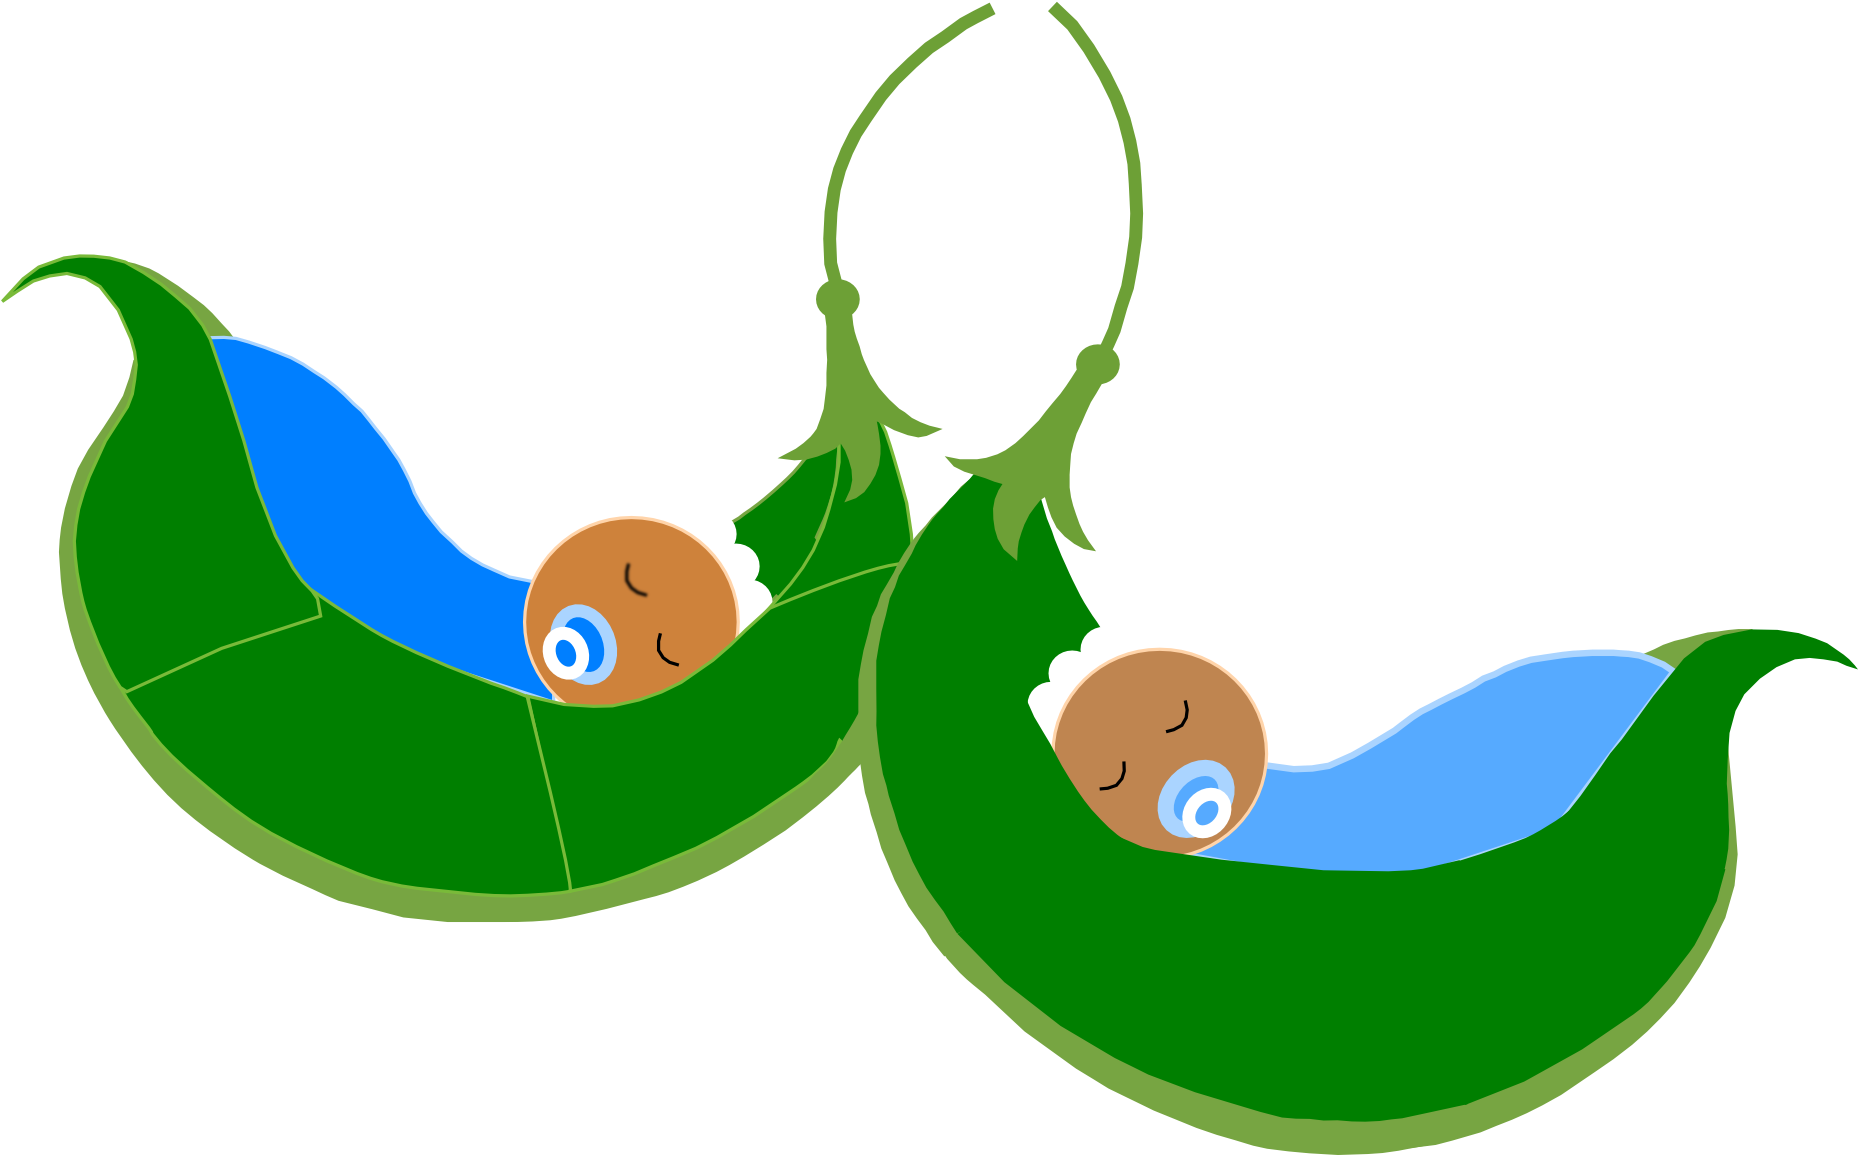 Babies, Sleeping, Cradle, Leaves, Dreaming, Cozy - Two Peas In A Pod (1920x1155)